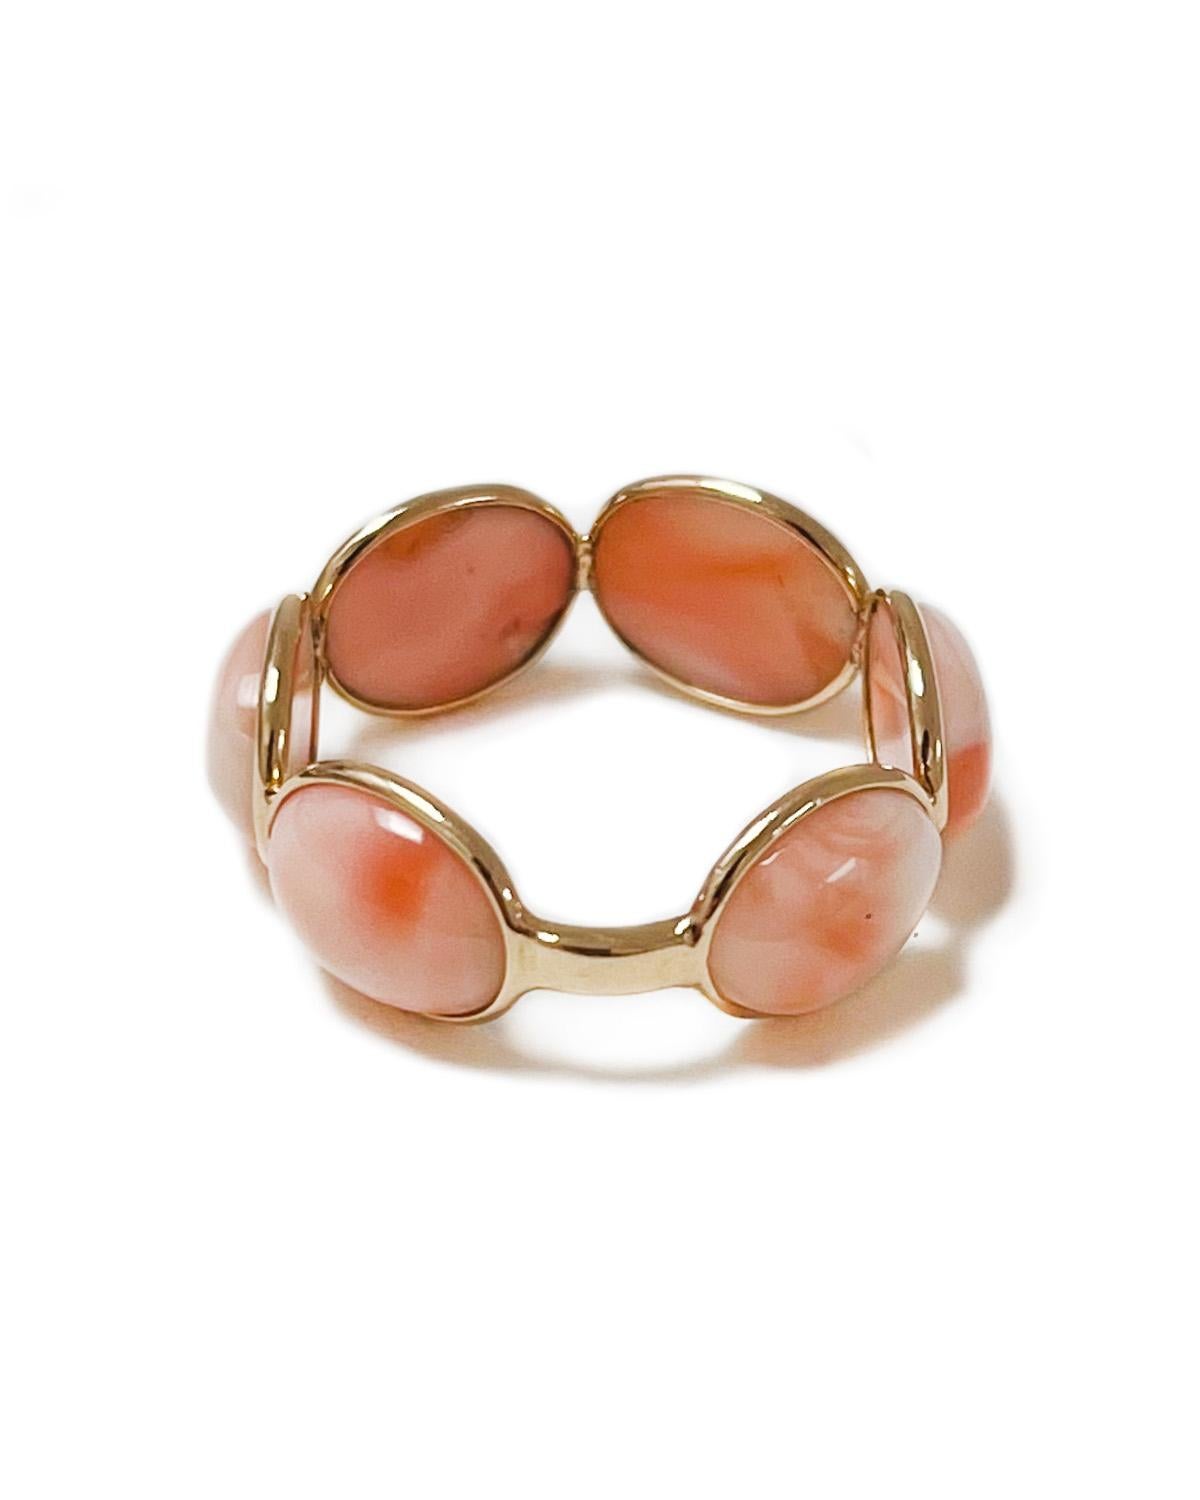 Intention: Stack it on

Dorian's Find: This vintage find is a peachy love. Here, large oval cabochon coral is in an 18k yellow gold spectacle setting to show off the full gemstone. You could spend hours gazing at the variations in color of each